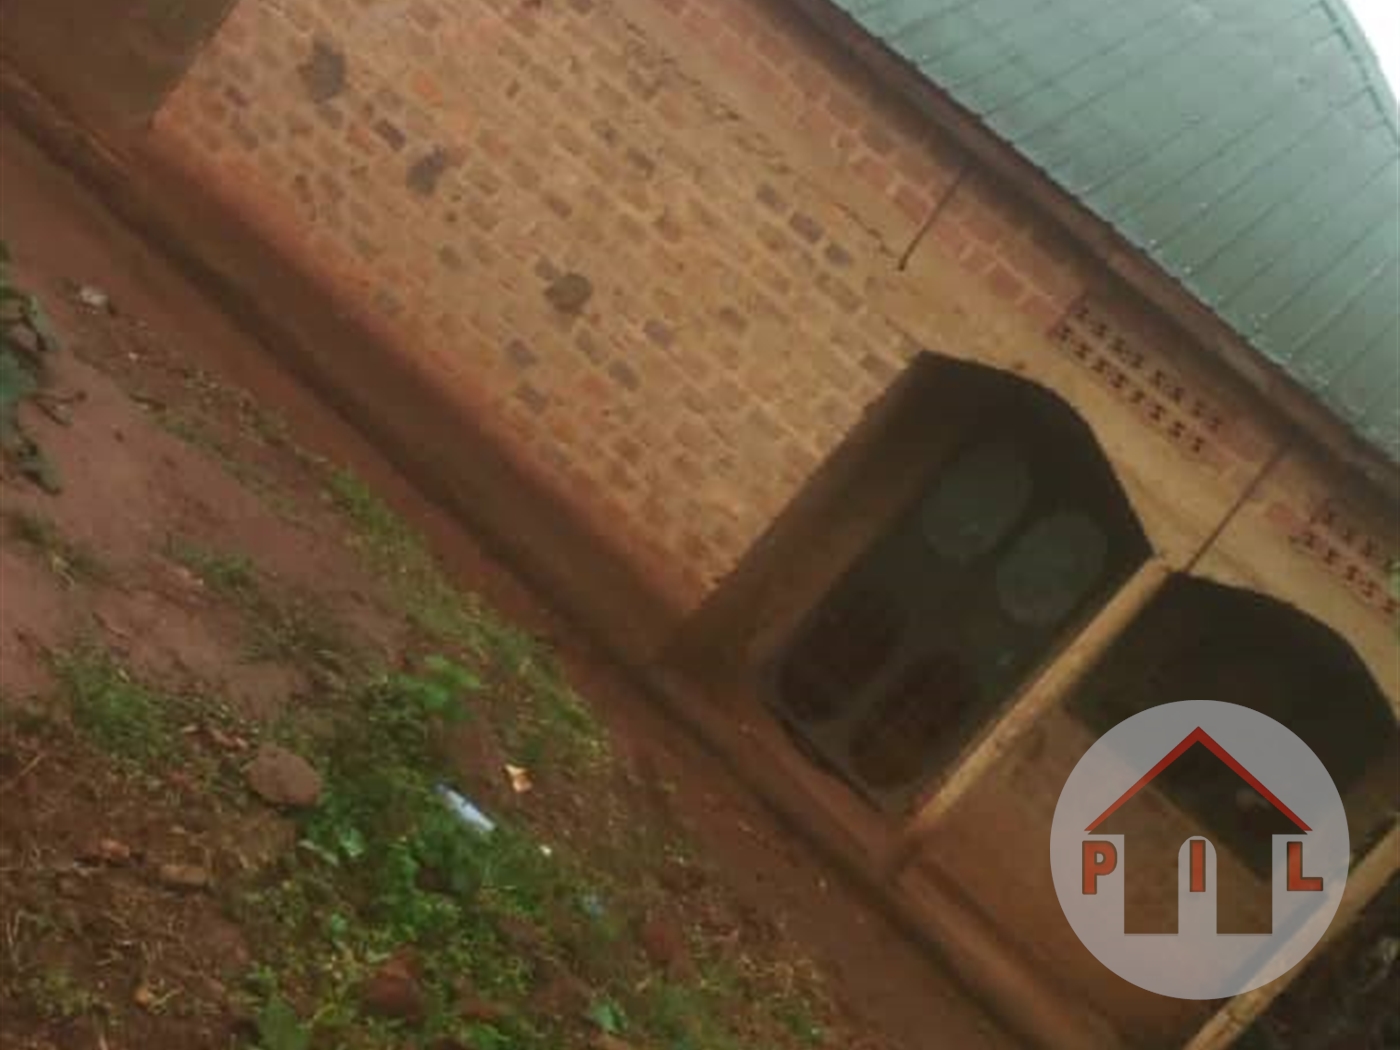 Shell House for sale in Nsangi Wakiso